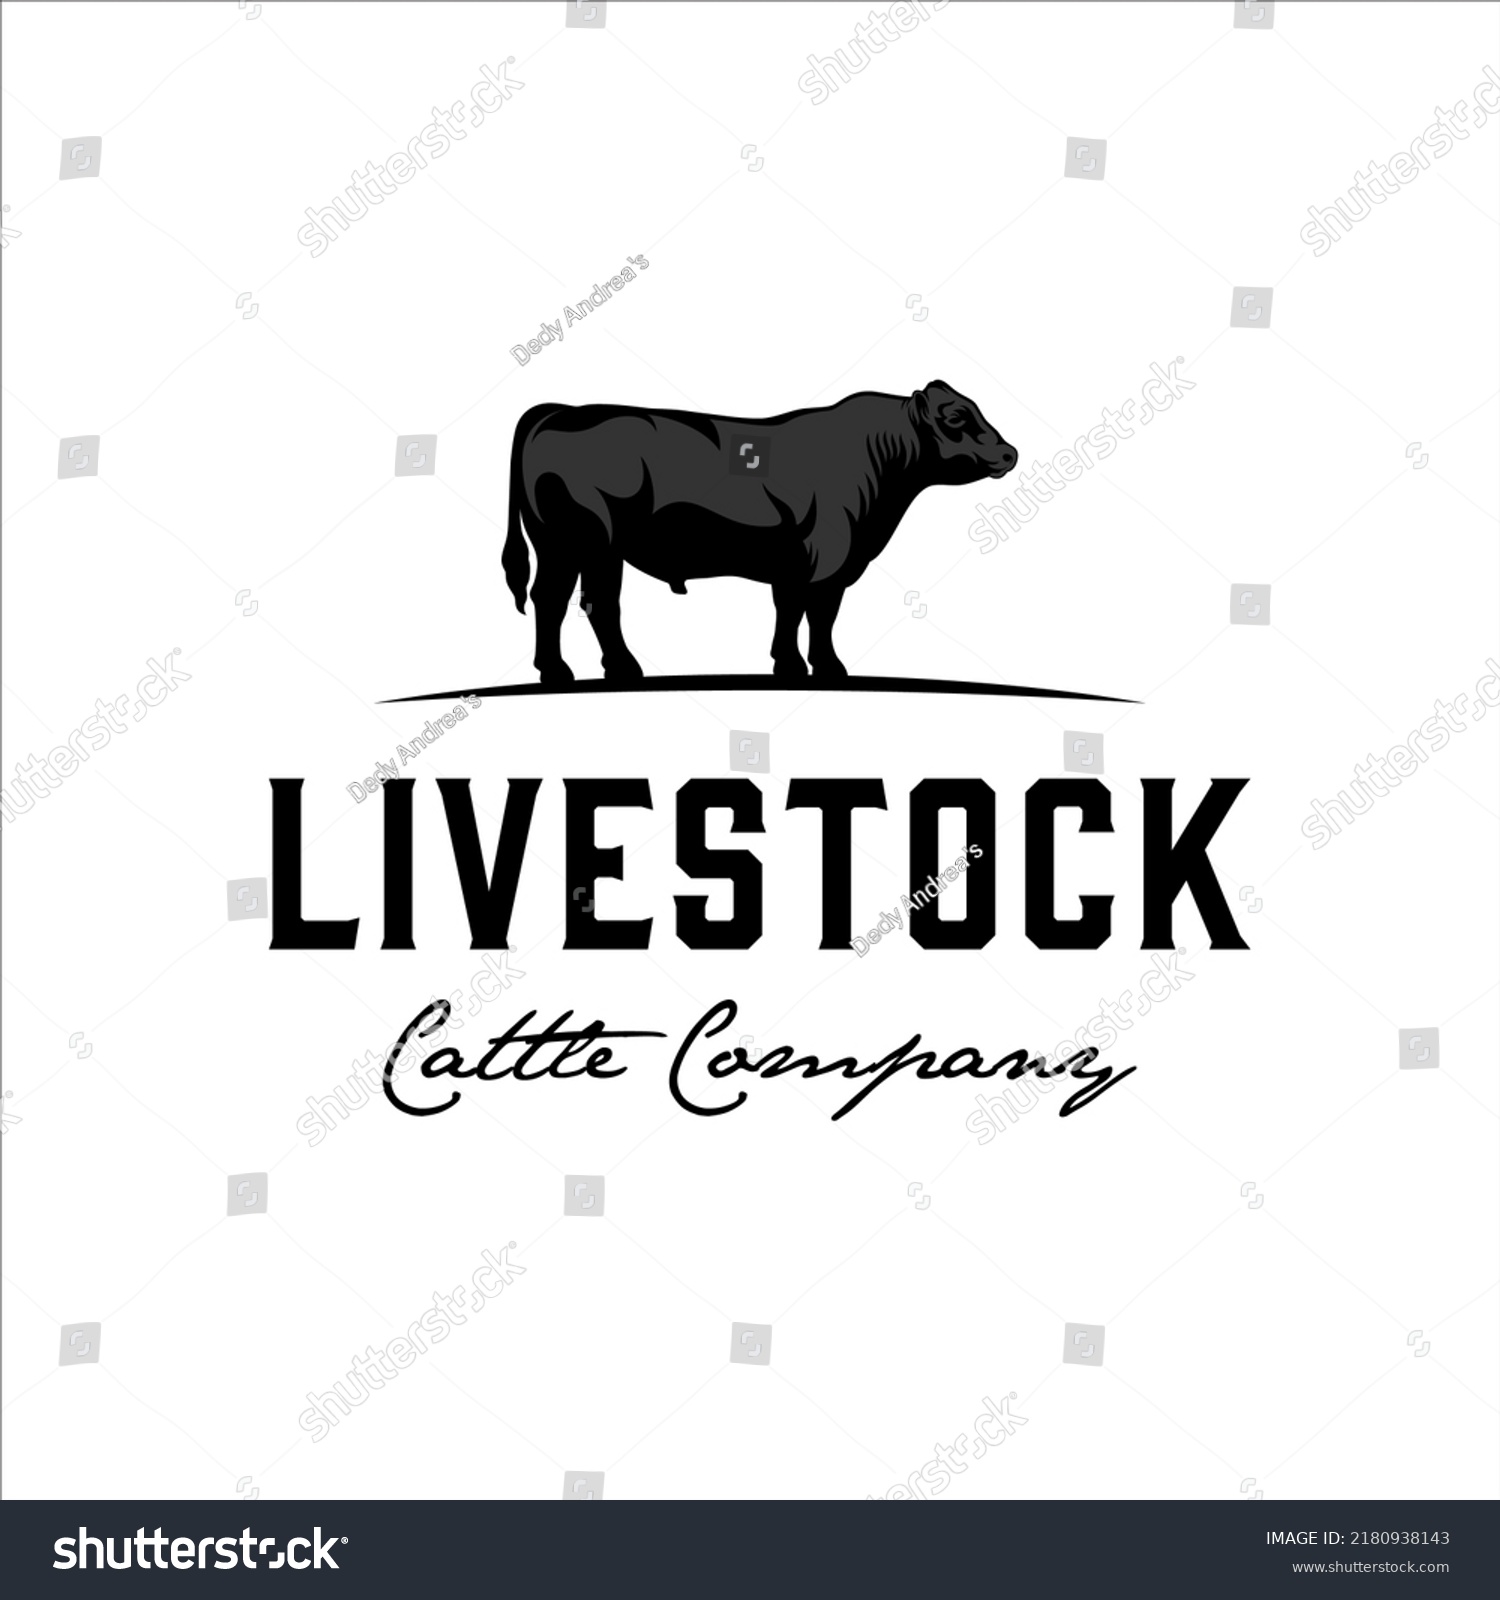 SVG of Black angus cattle logo with masculine style design svg